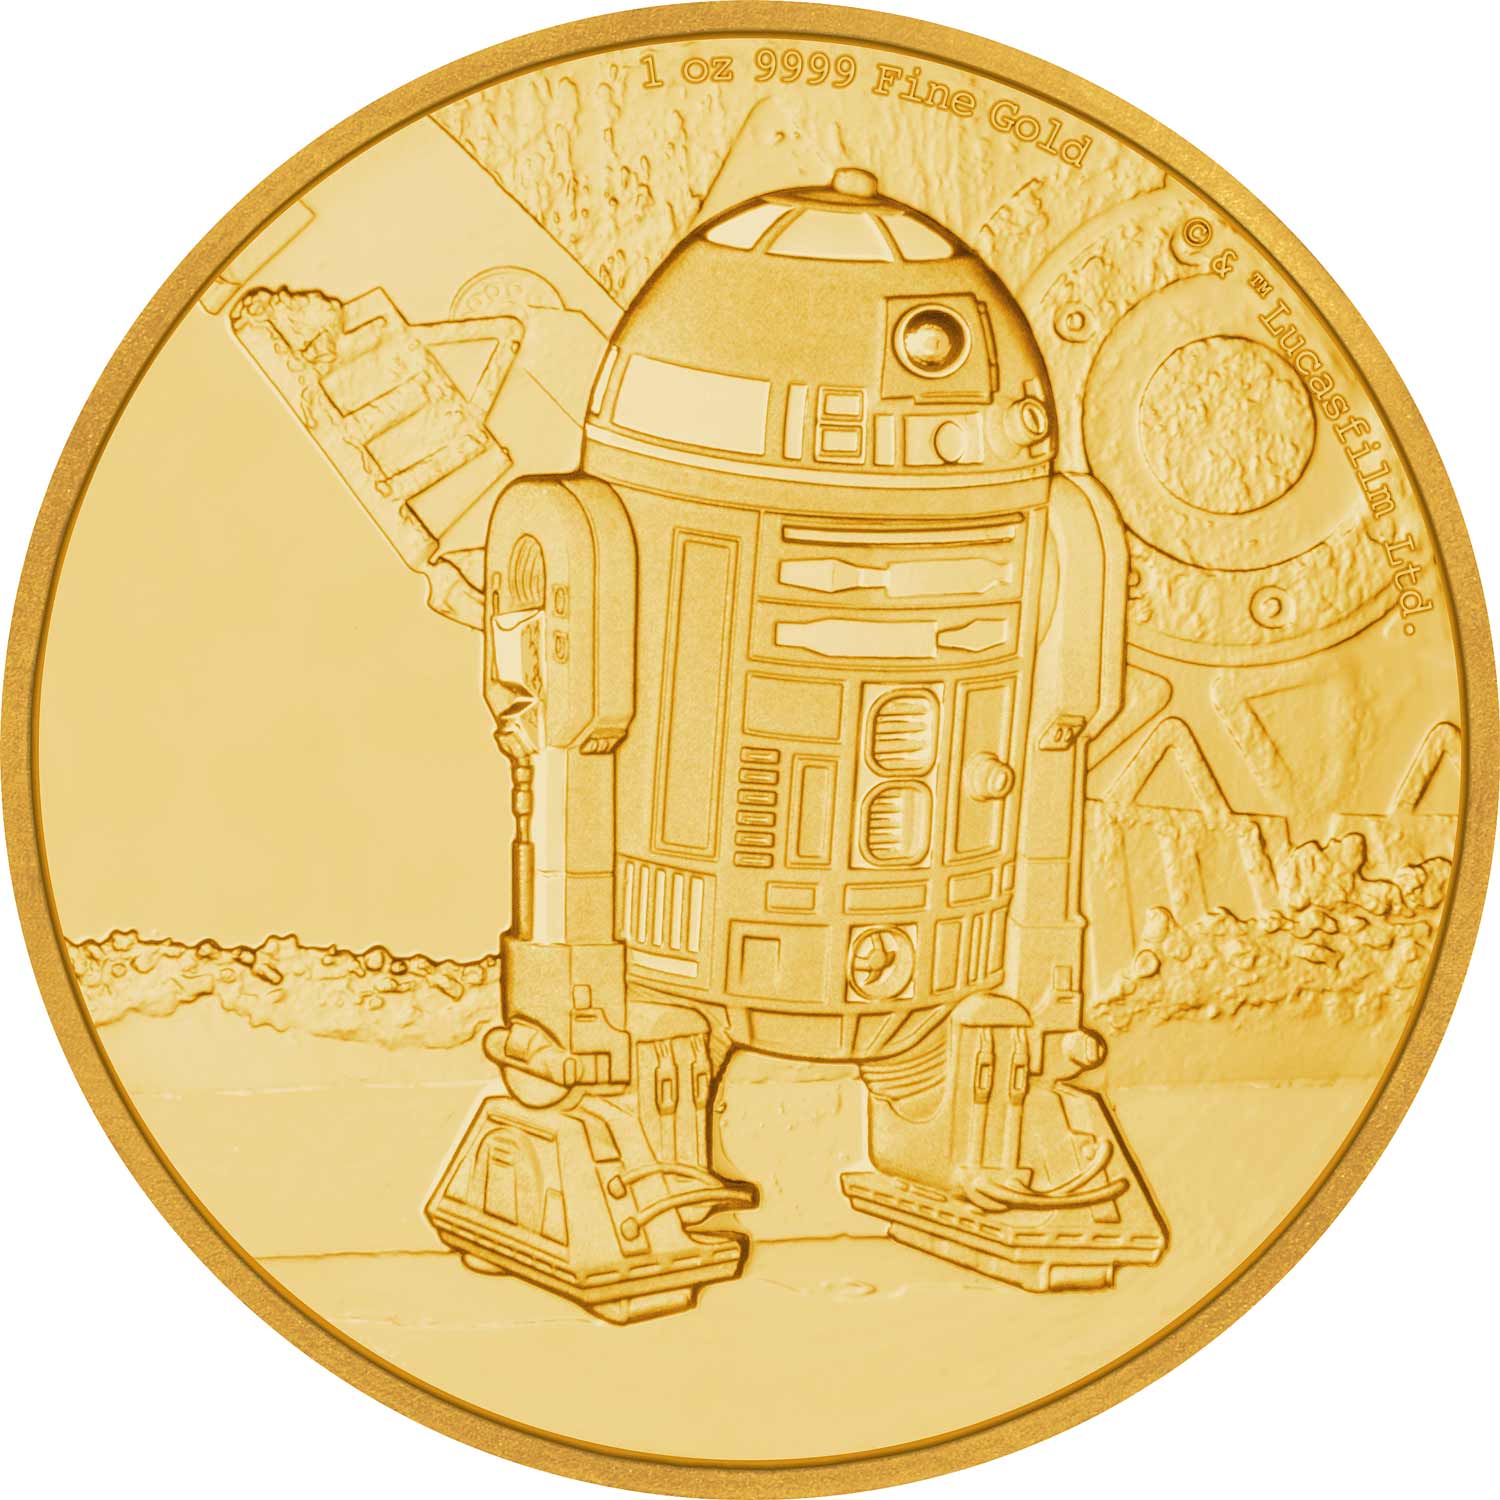 STAR WARS ROTS 2005 SILVER MEDALIONZ R2-D2 & C-3PO SILVER COIN